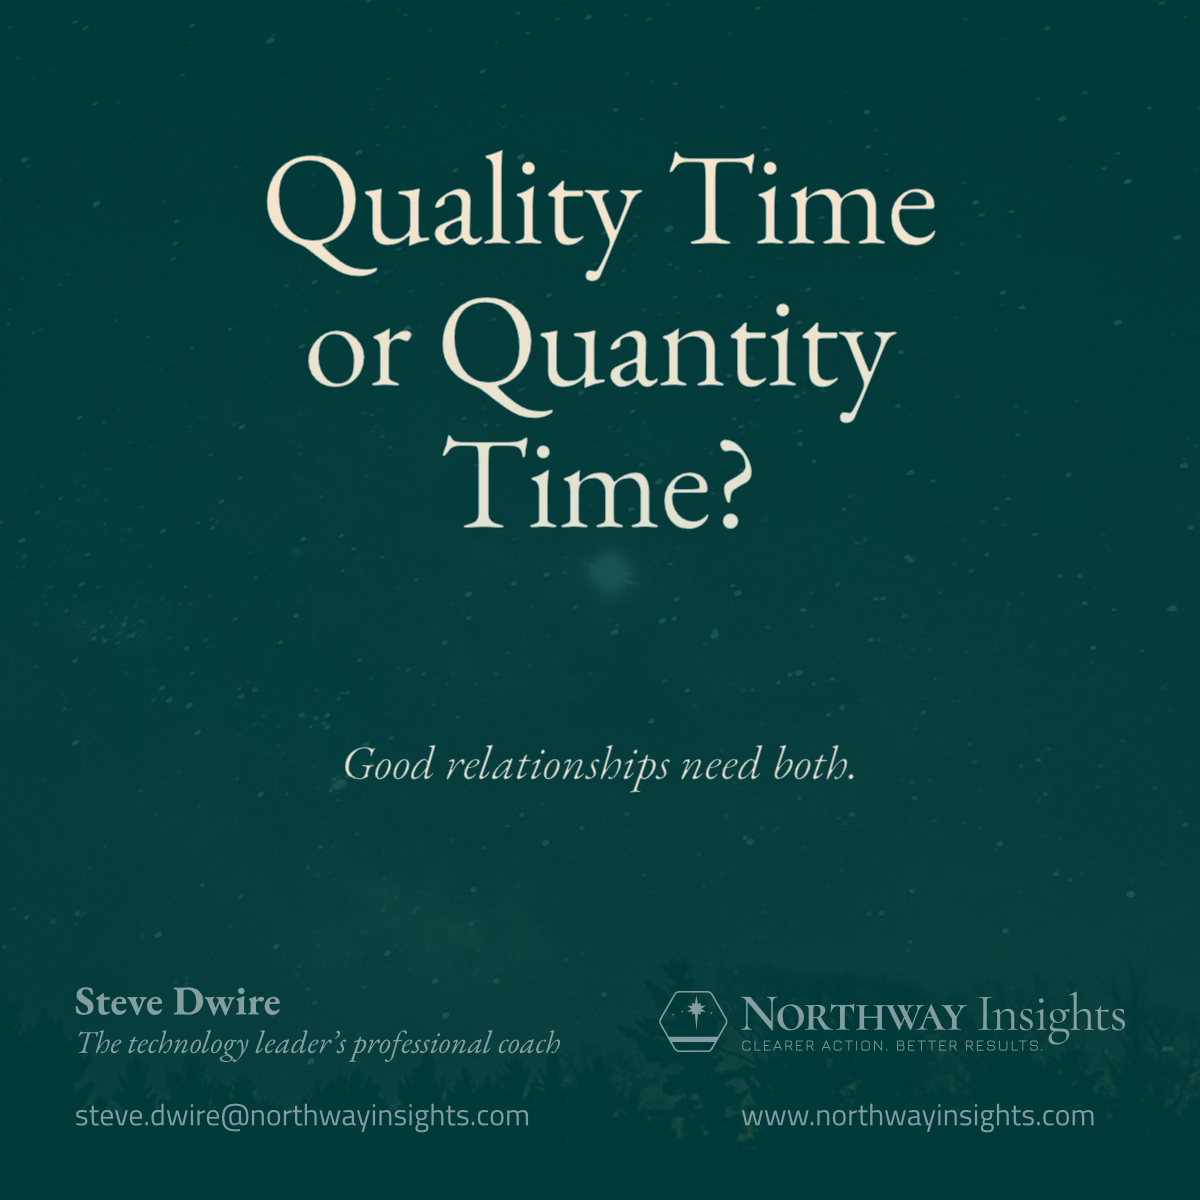 Quality Time or Quantity Time?